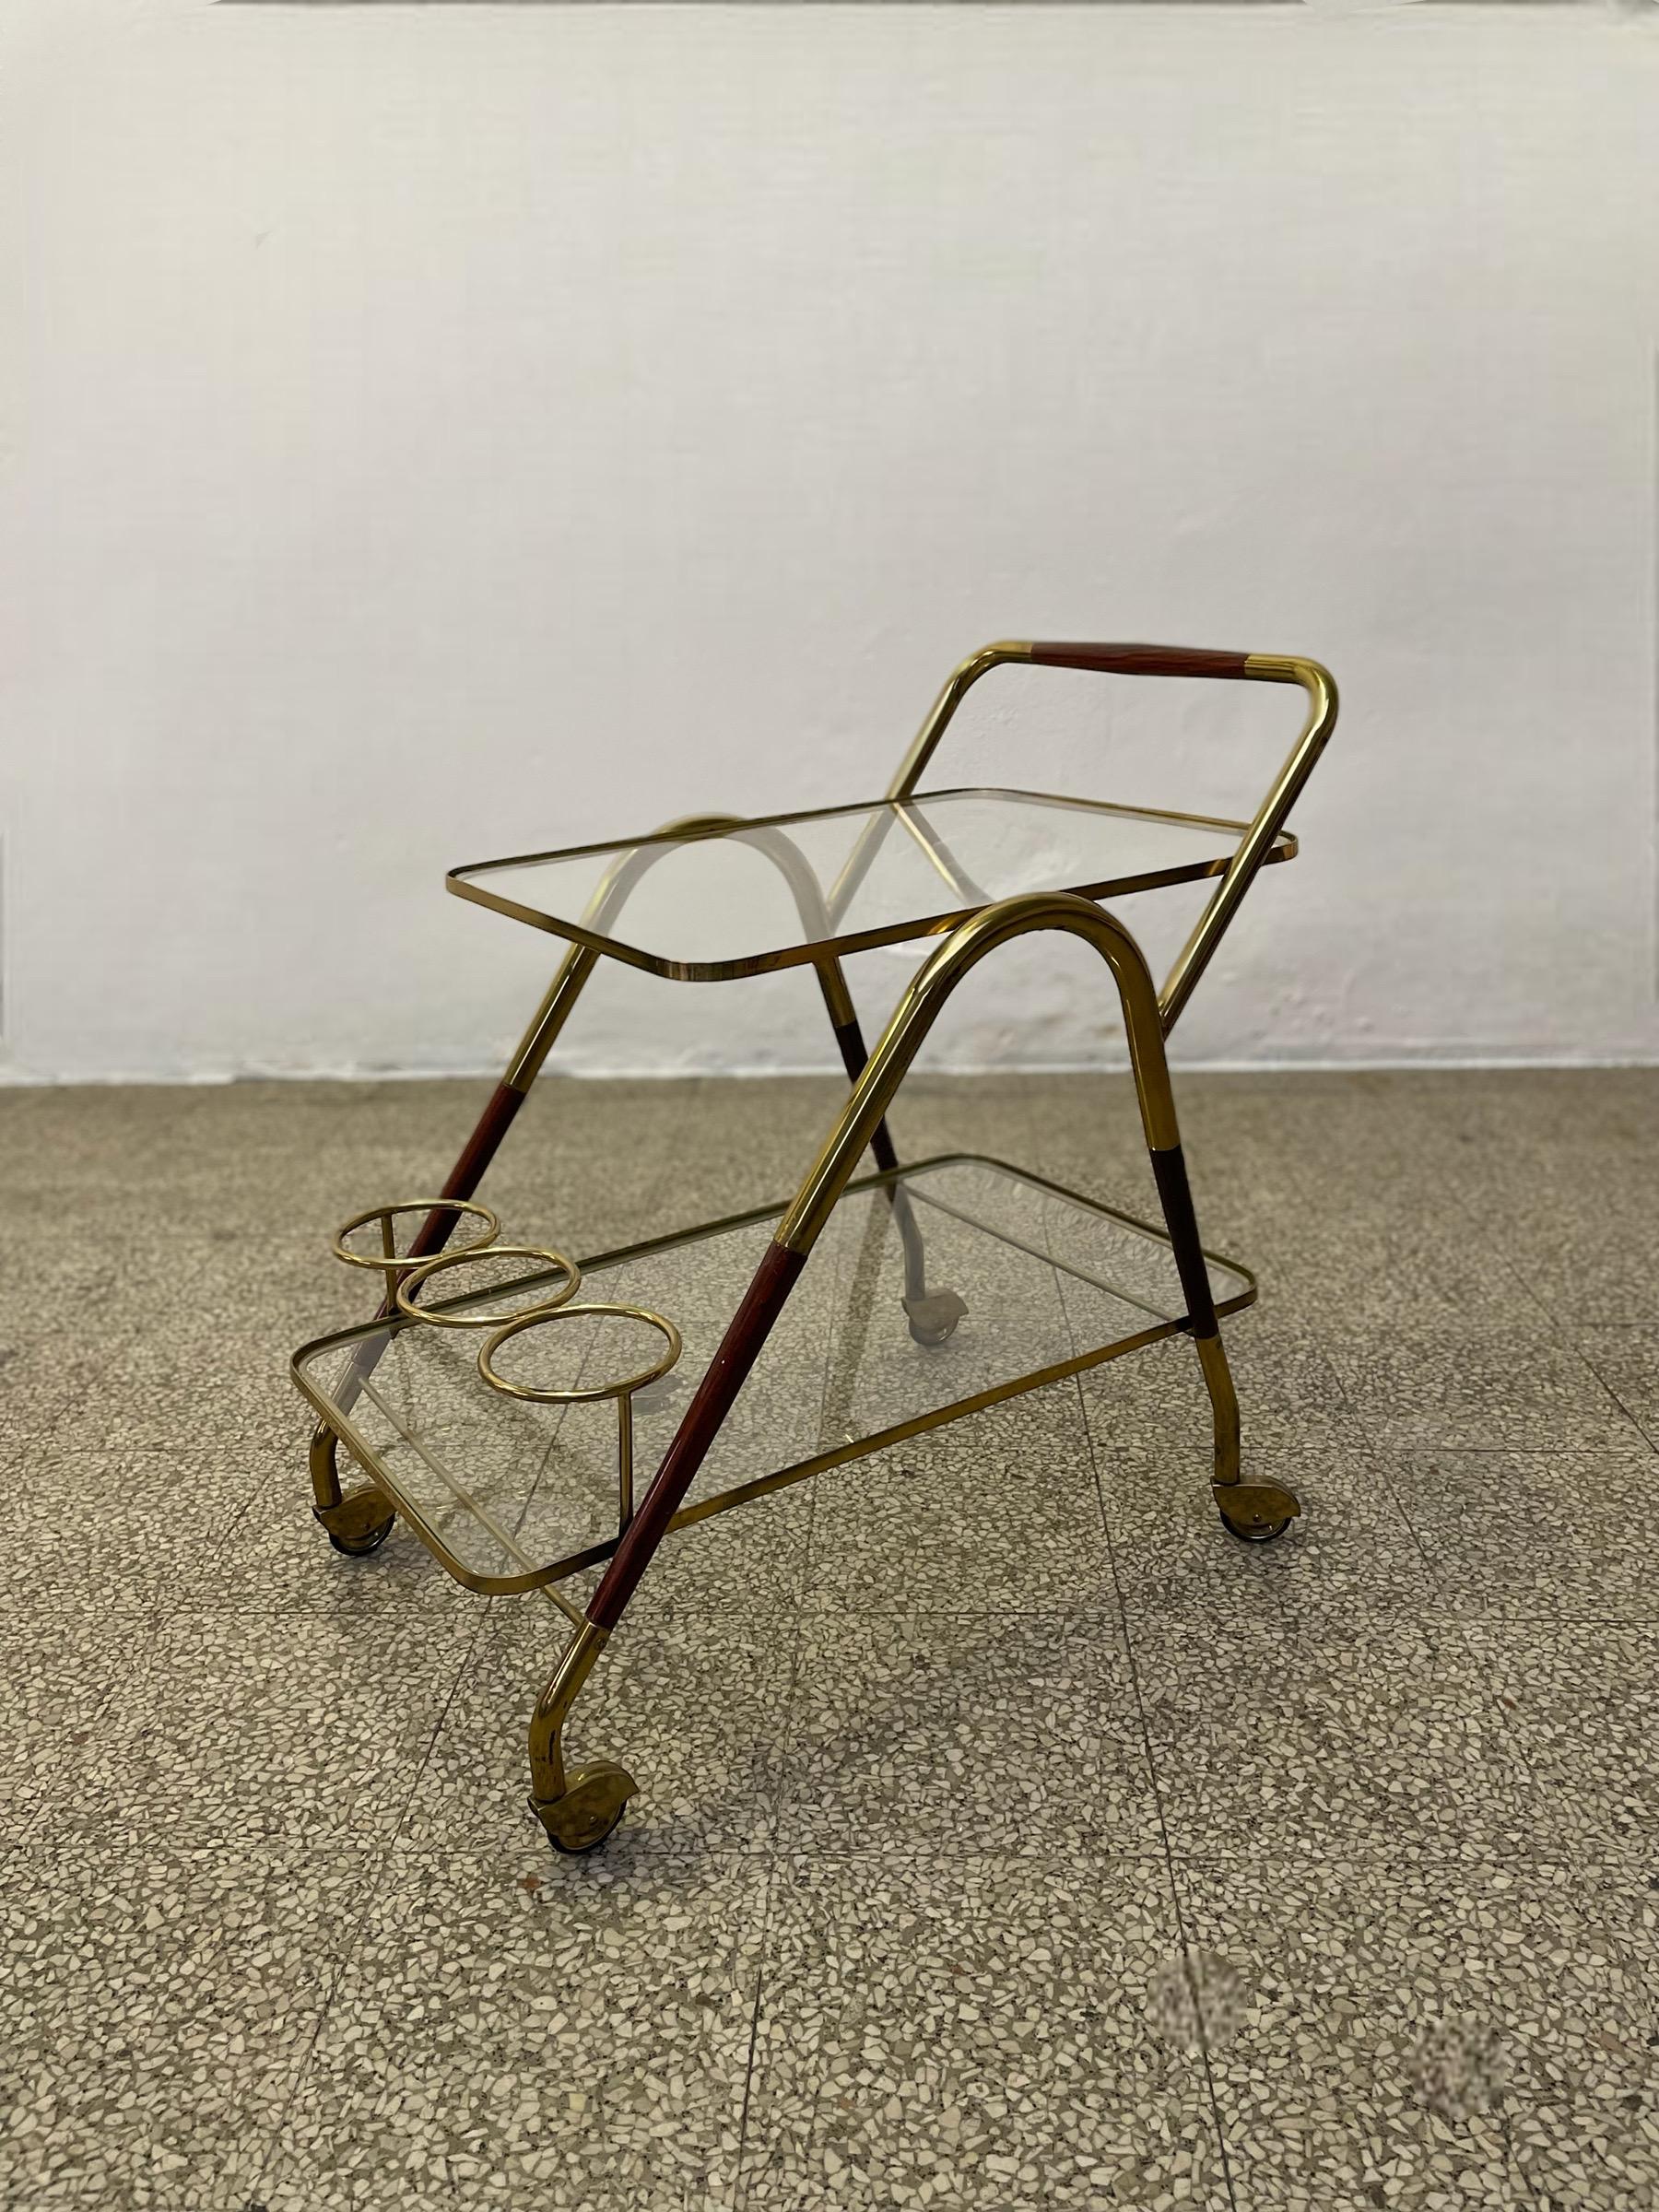 This classy Italian bar cart by Cesare Lacca from the 1950s is a true embodiment of Mid-Century Modern elegance. Crafted from high-quality brass and rich cherry wood, this piece exudes a warm, inviting glow that is perfectly complemented by its